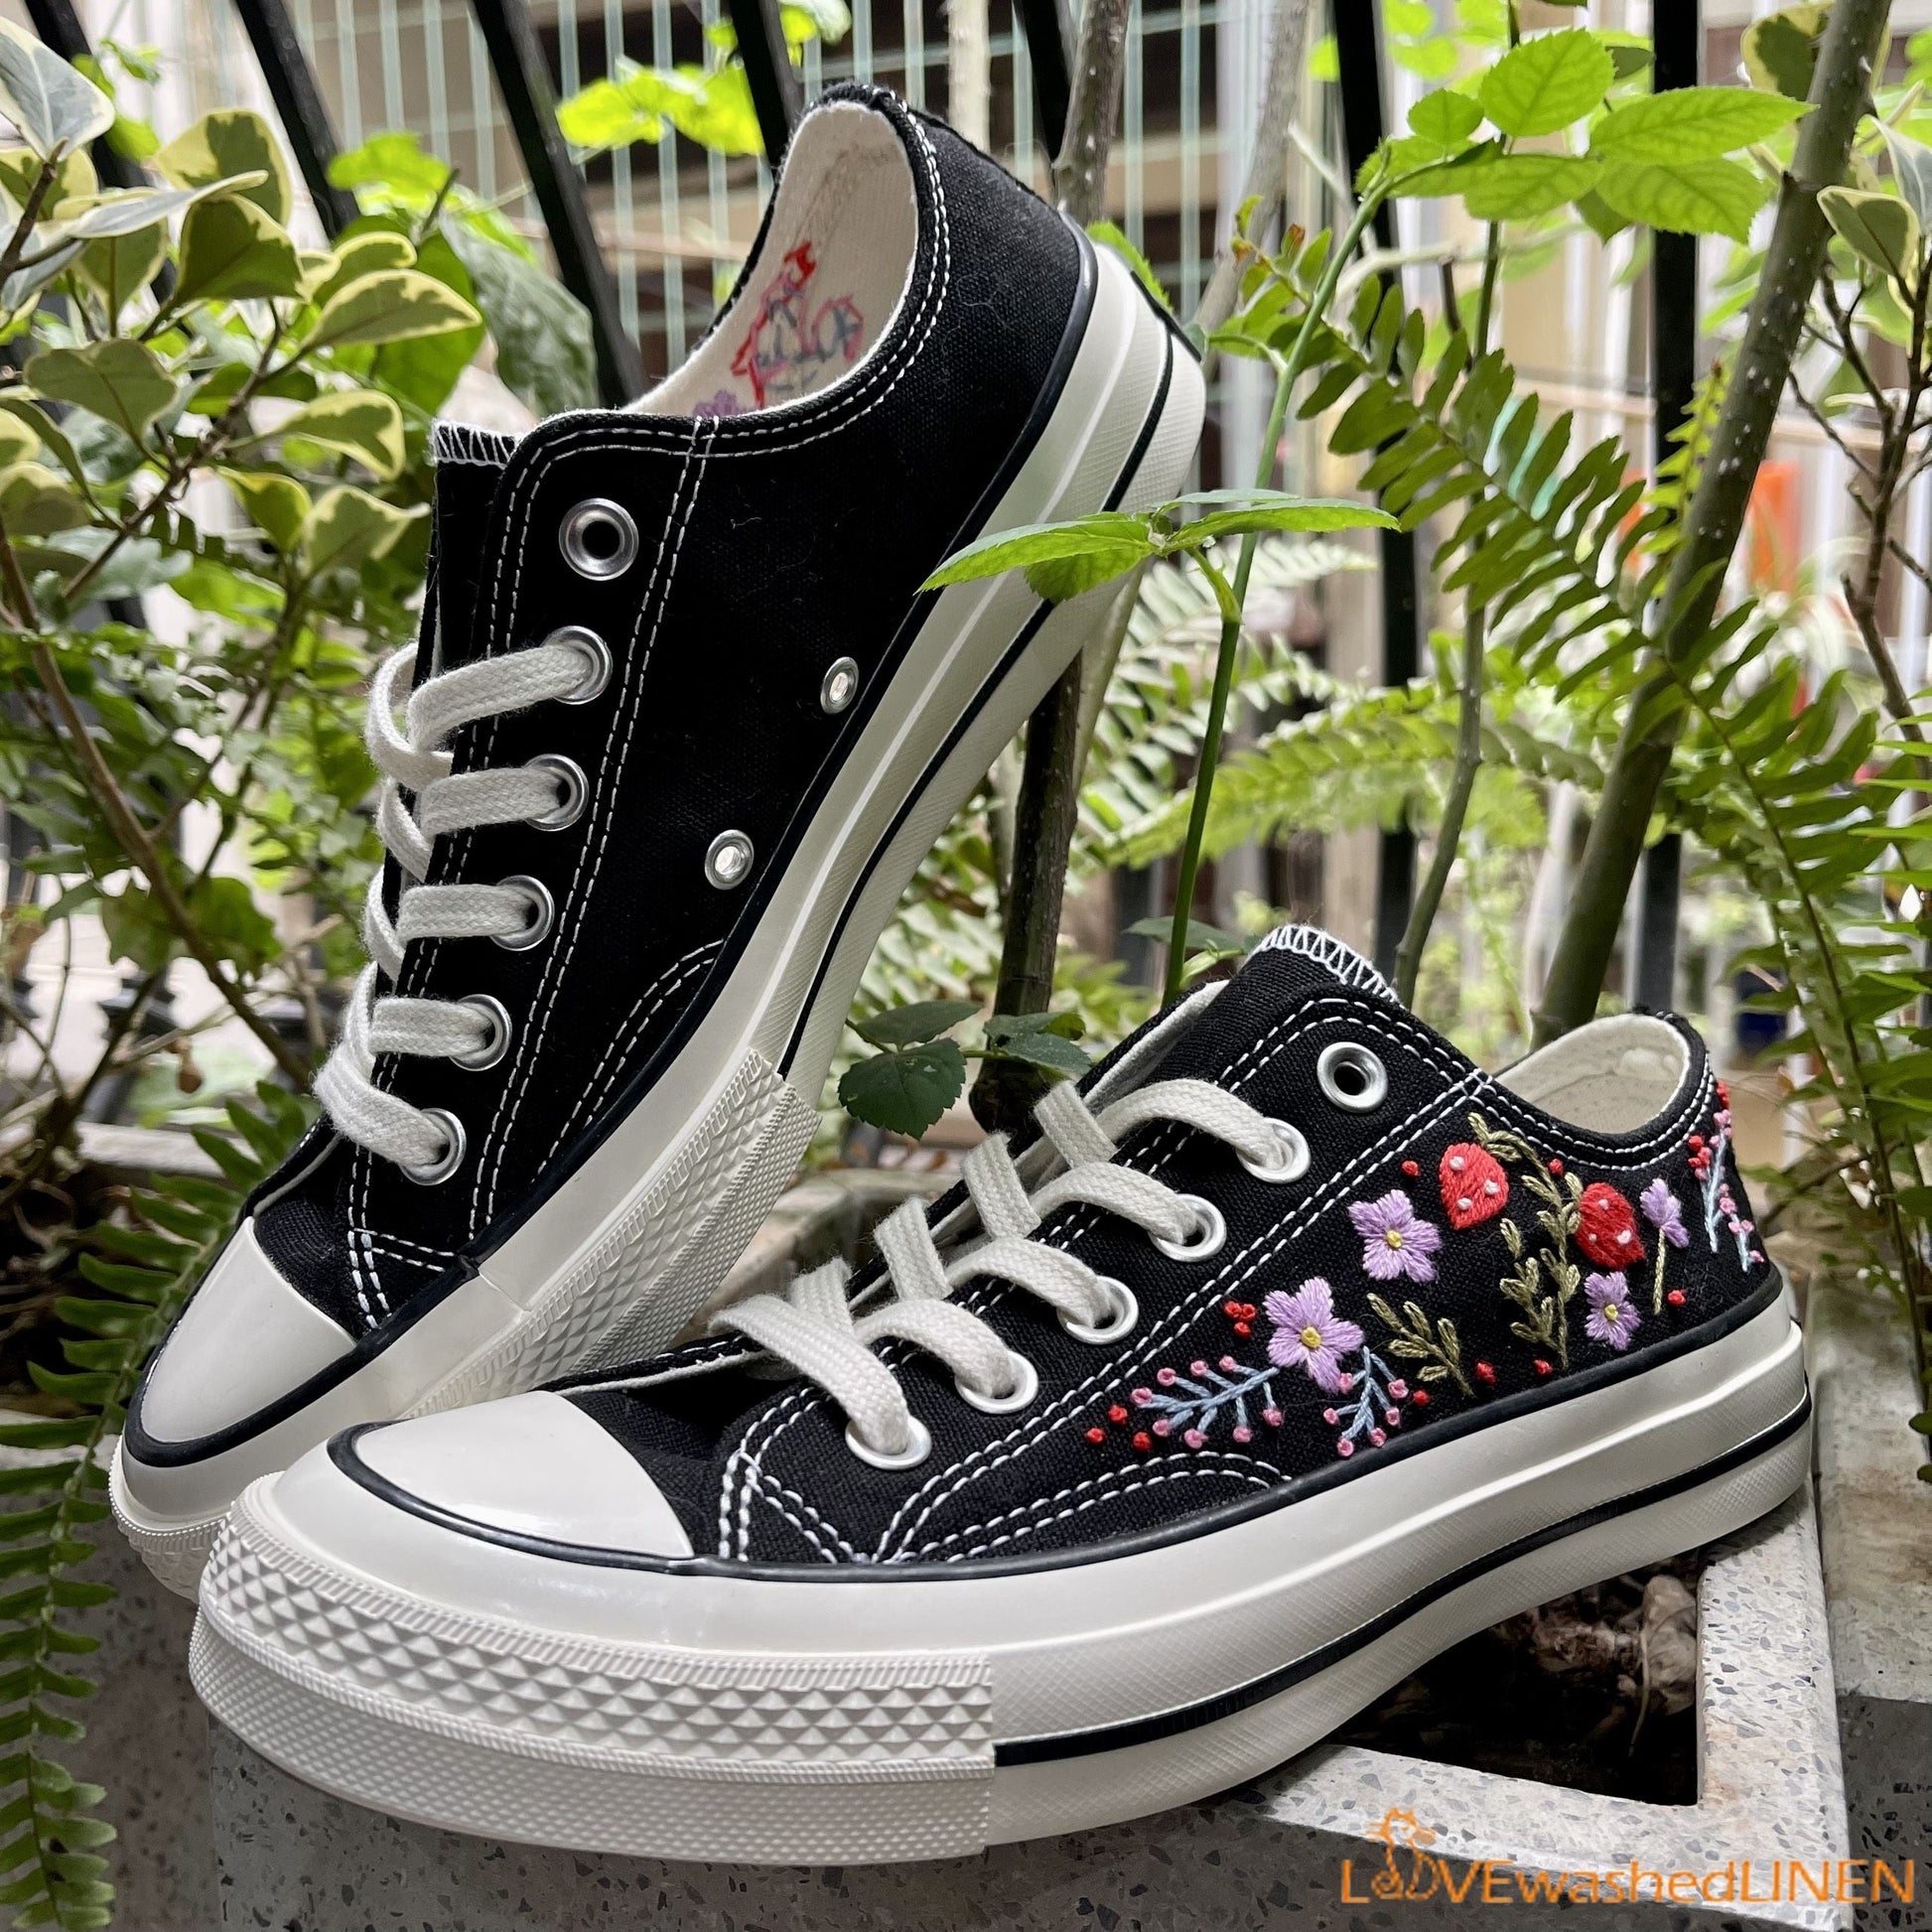 Converse Chuck Taylor All Star Shoes Embroidered by Hand to Order  Personalized Embroidery in Your Choice of Color and Style Custom 